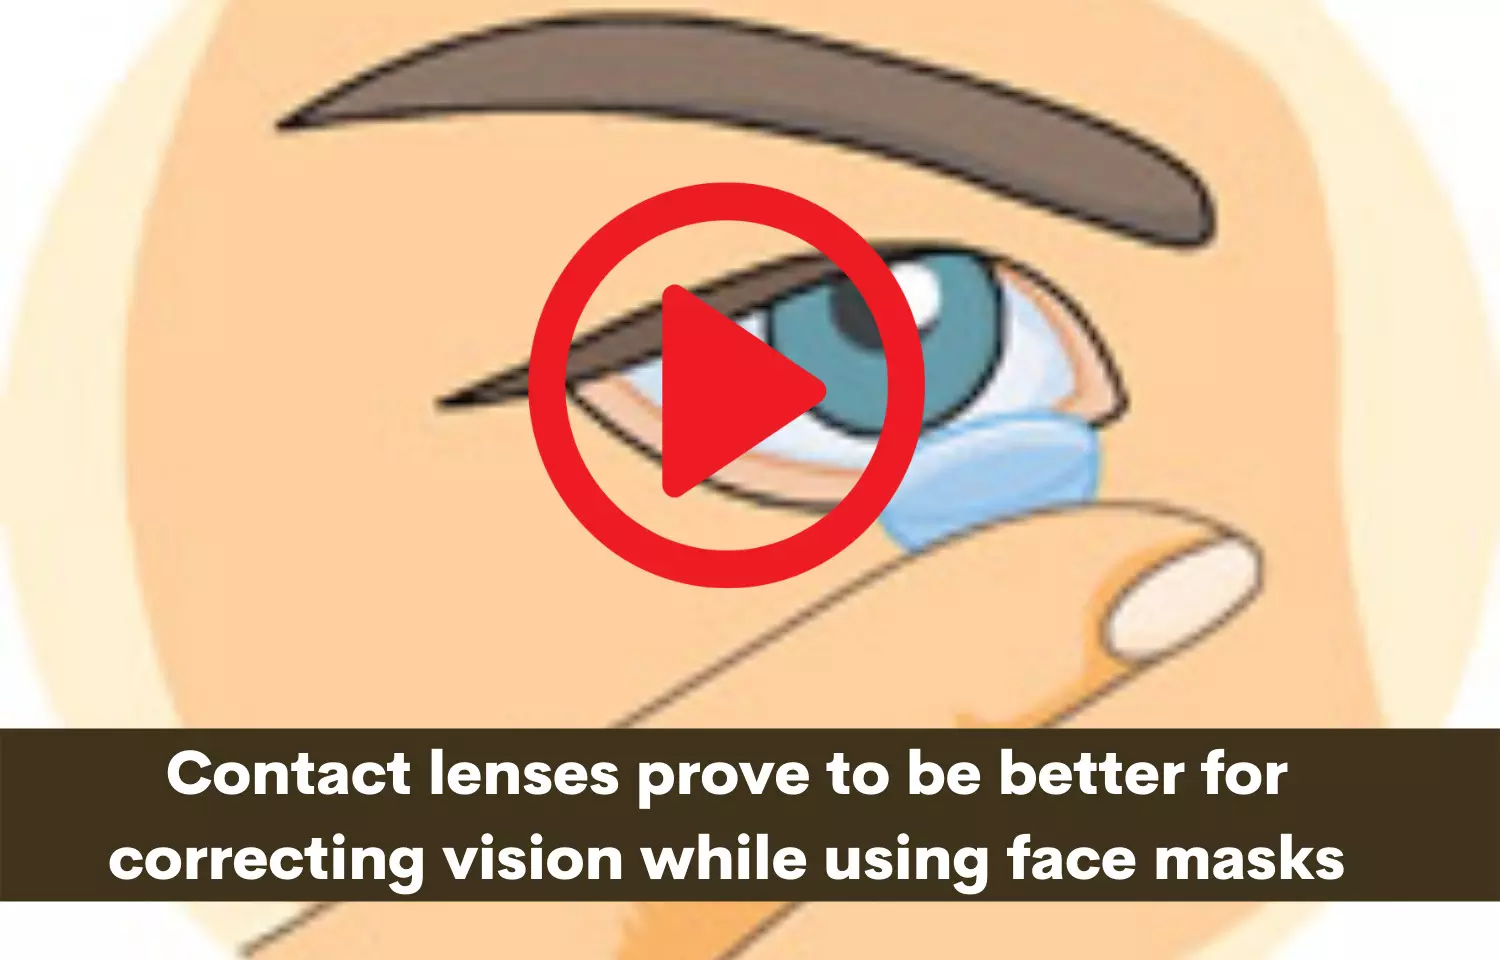 Contact lenses prove to be better for correcting vision while using face masks